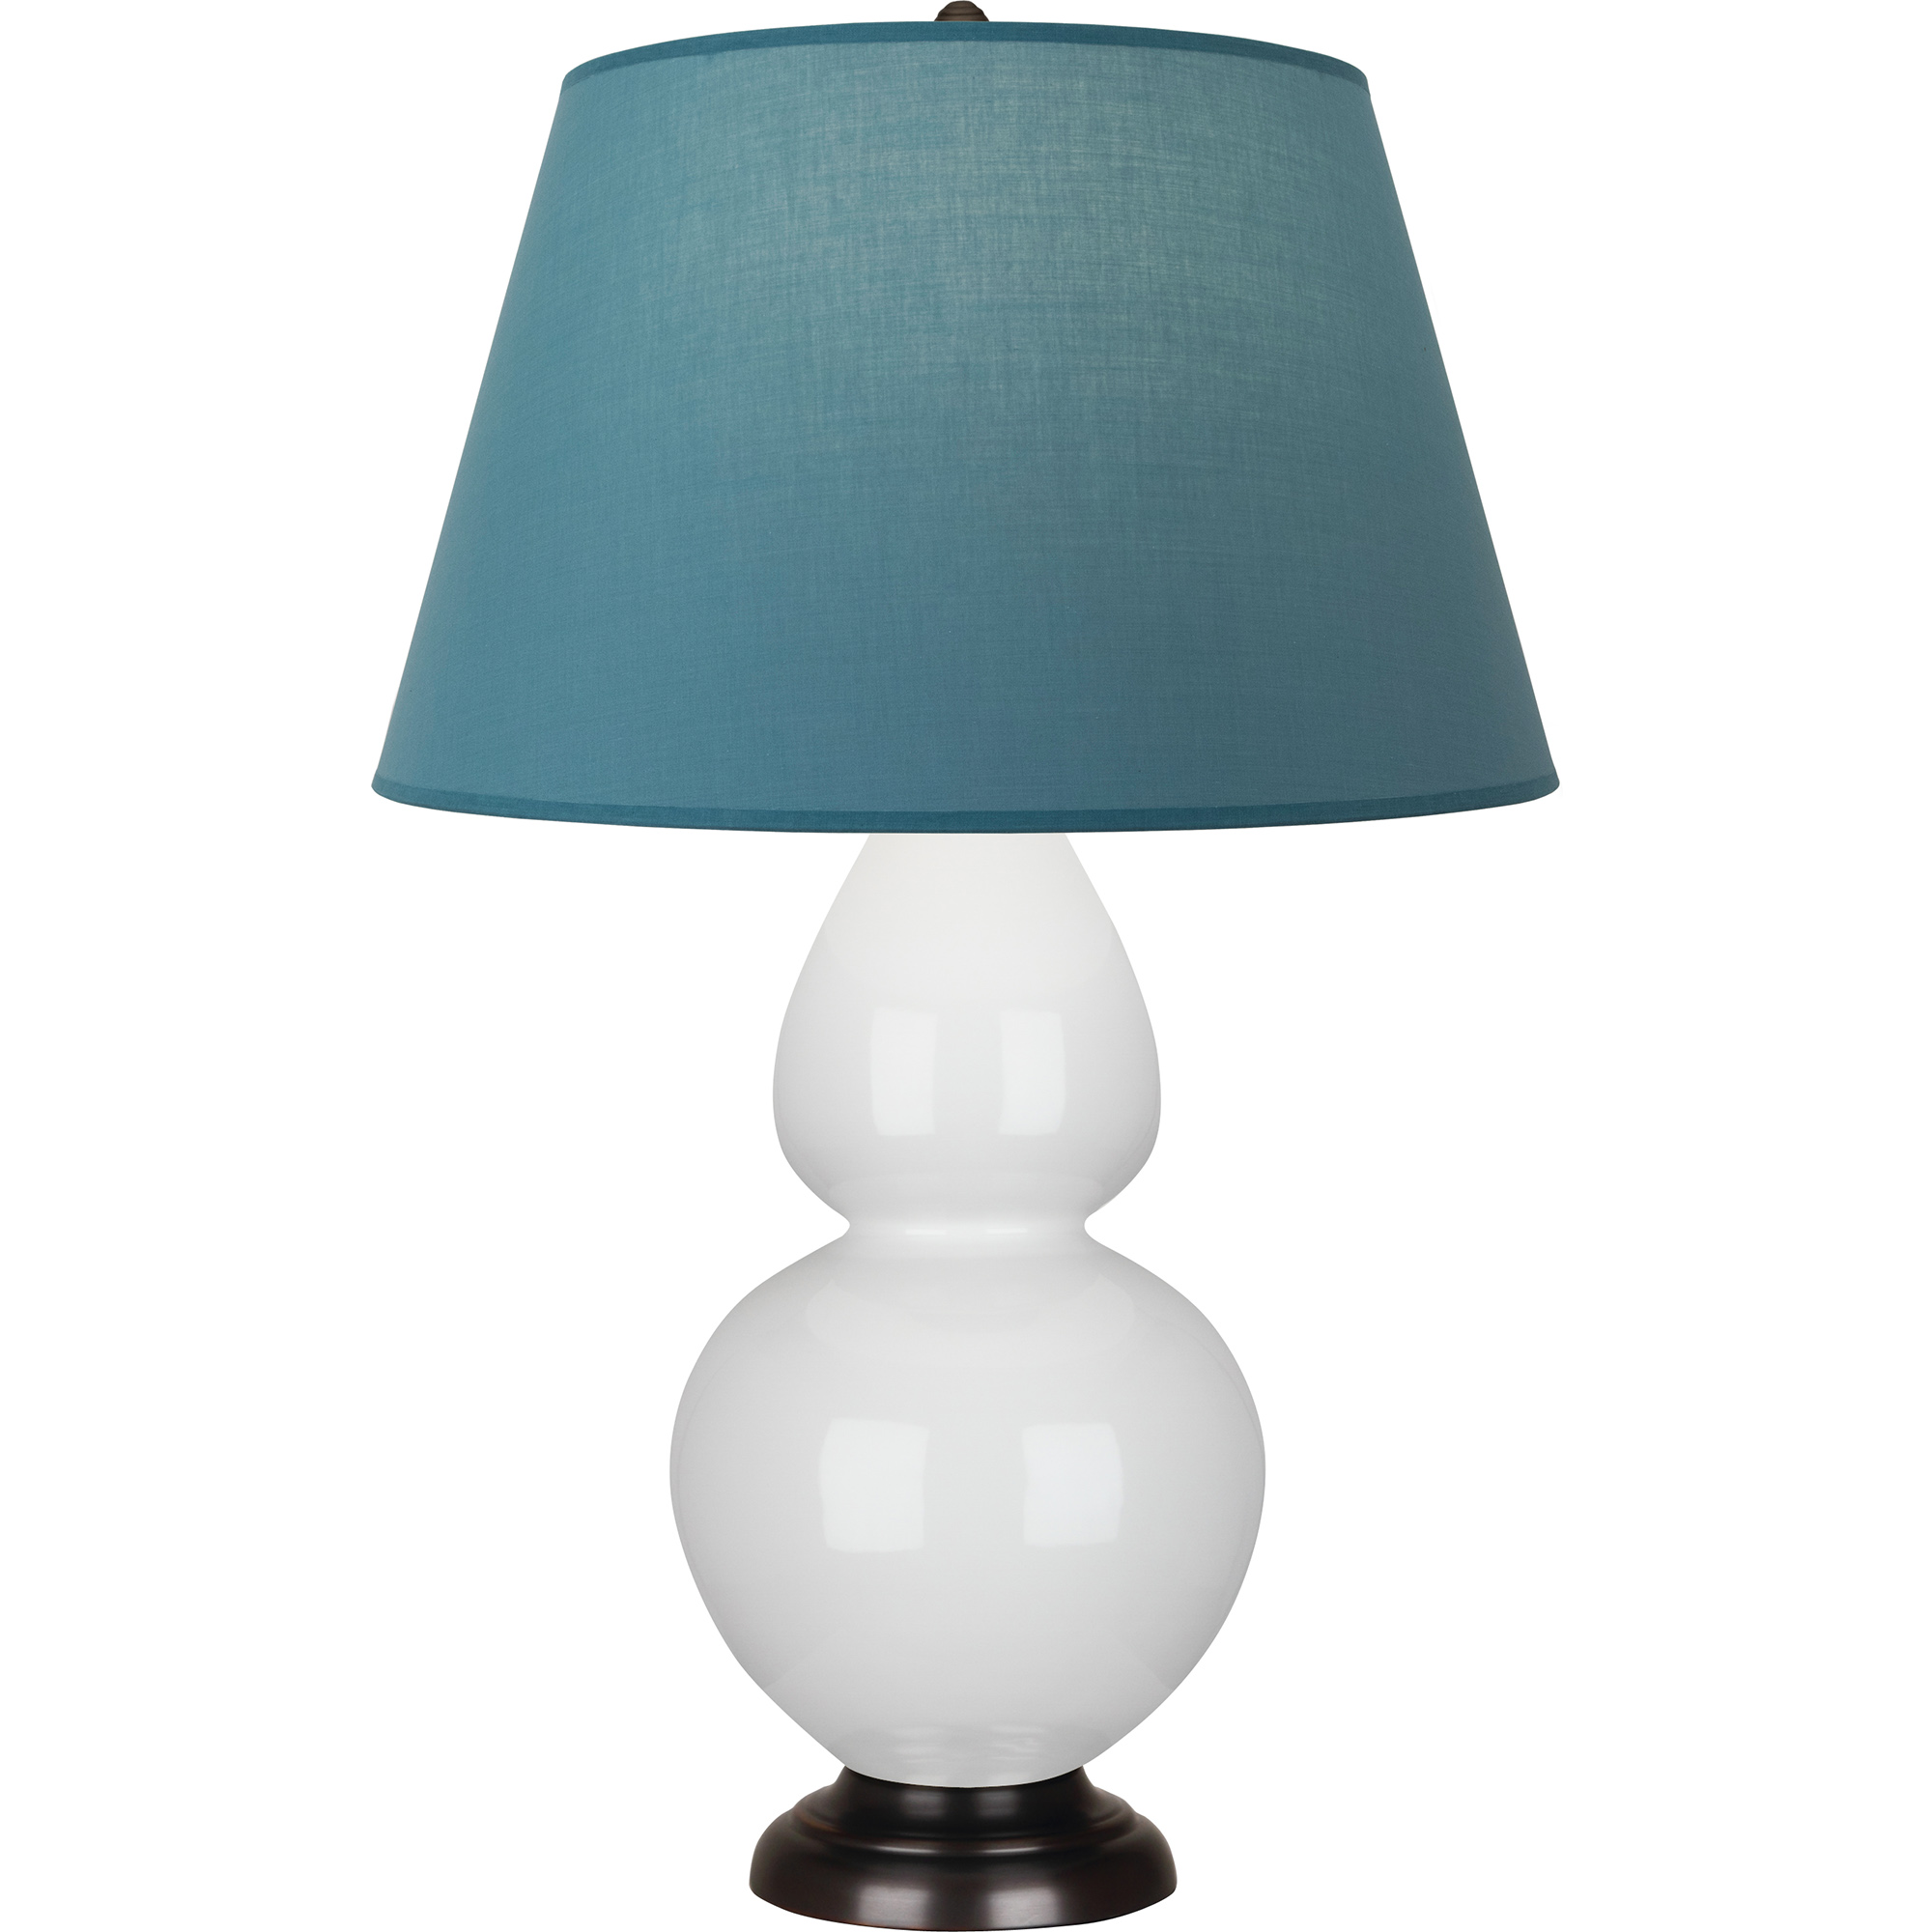 Double Gourd Table Lamp Style #1640B